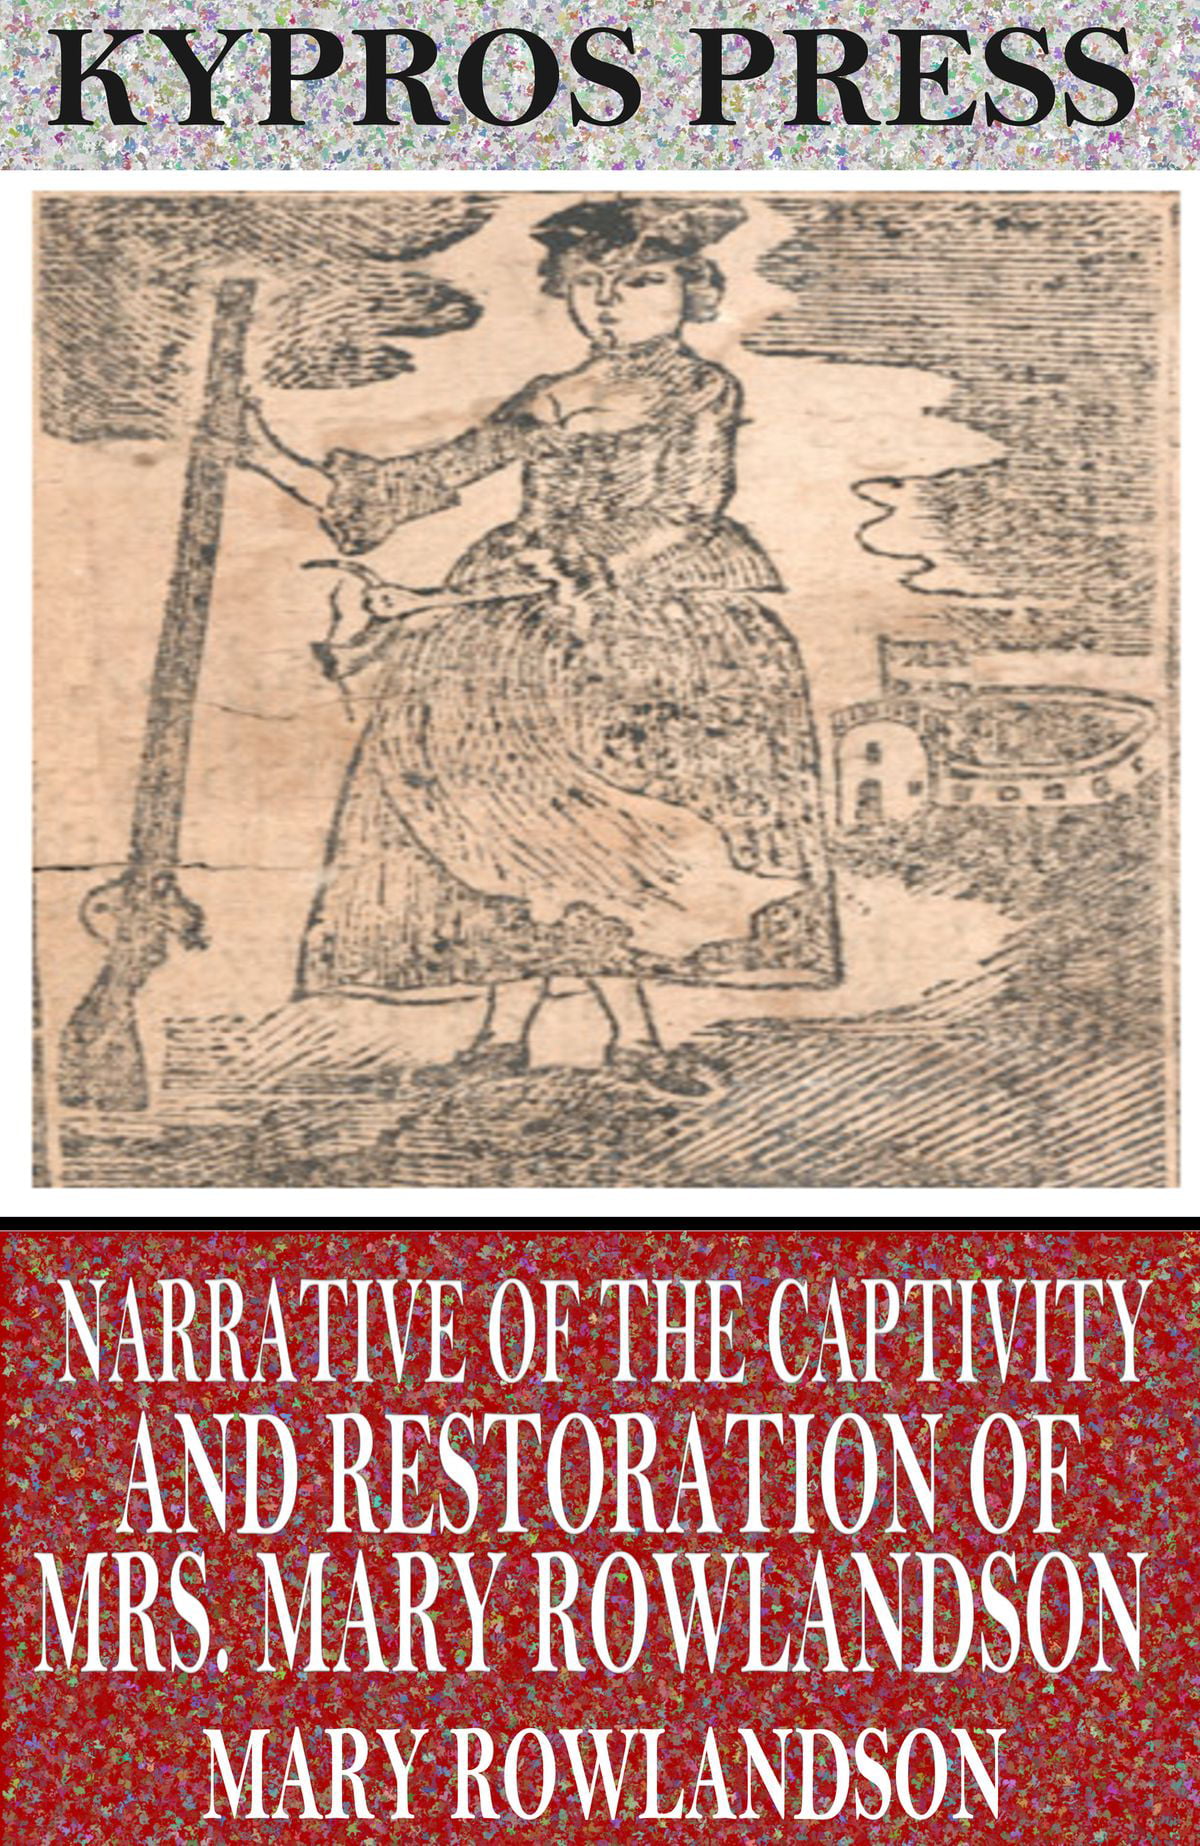 Self-Preservation In Mary Rowlandsons Captivity